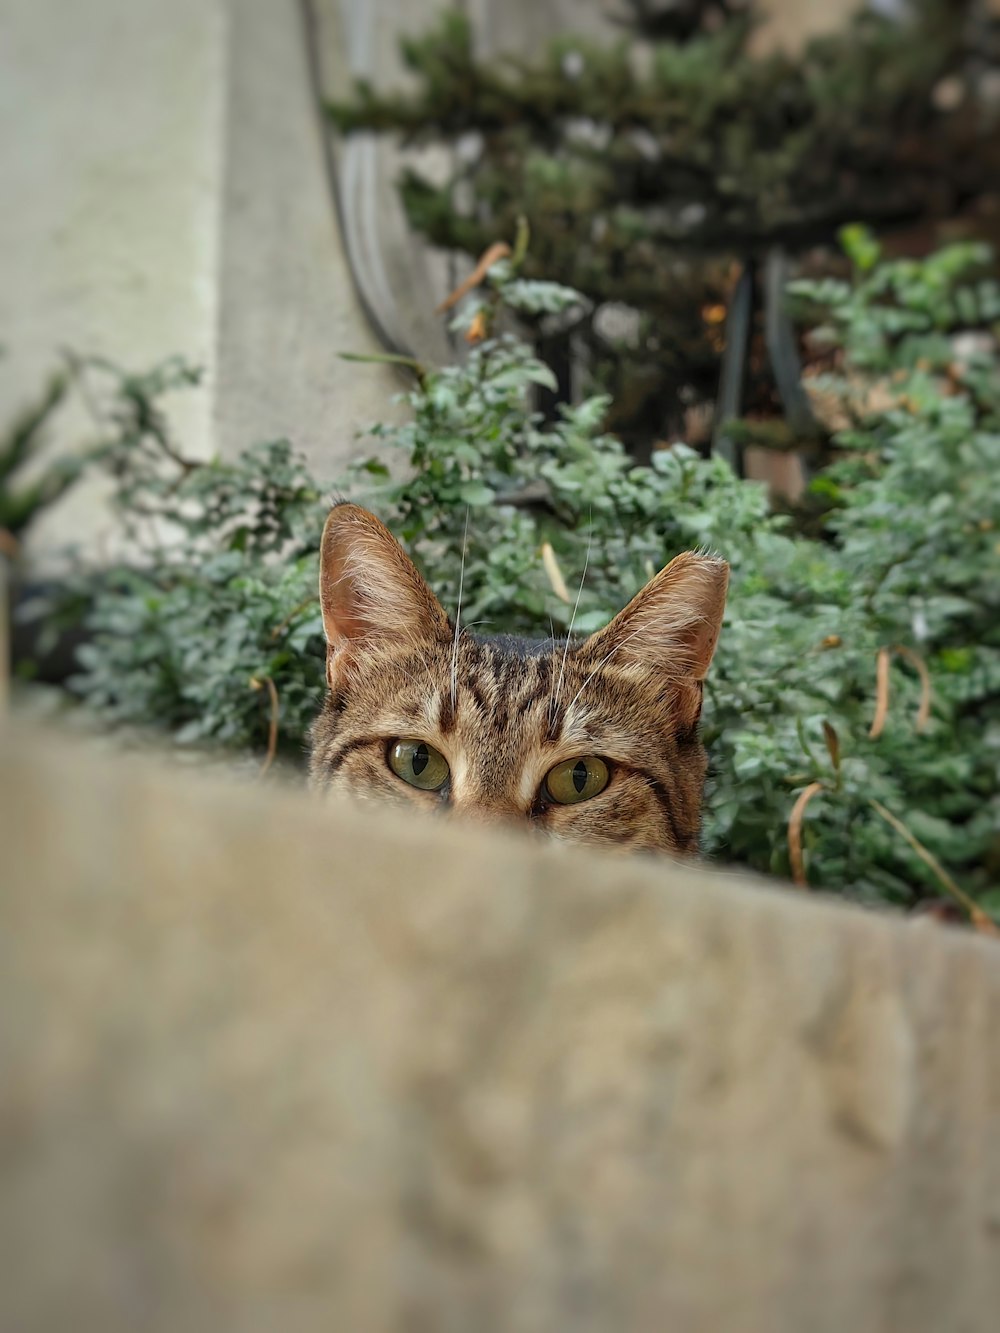 a cat peeking out from behind a stone wall